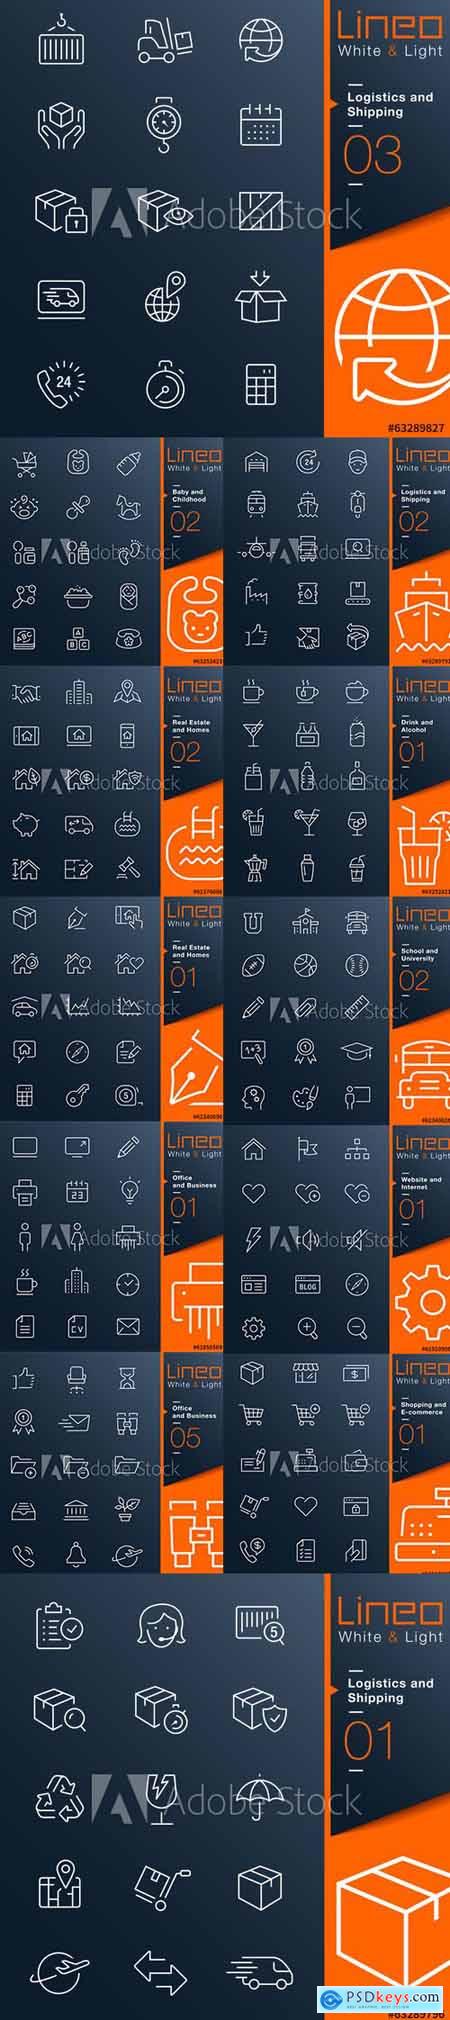 Vector Set - Lineo White and Light Outline Icons